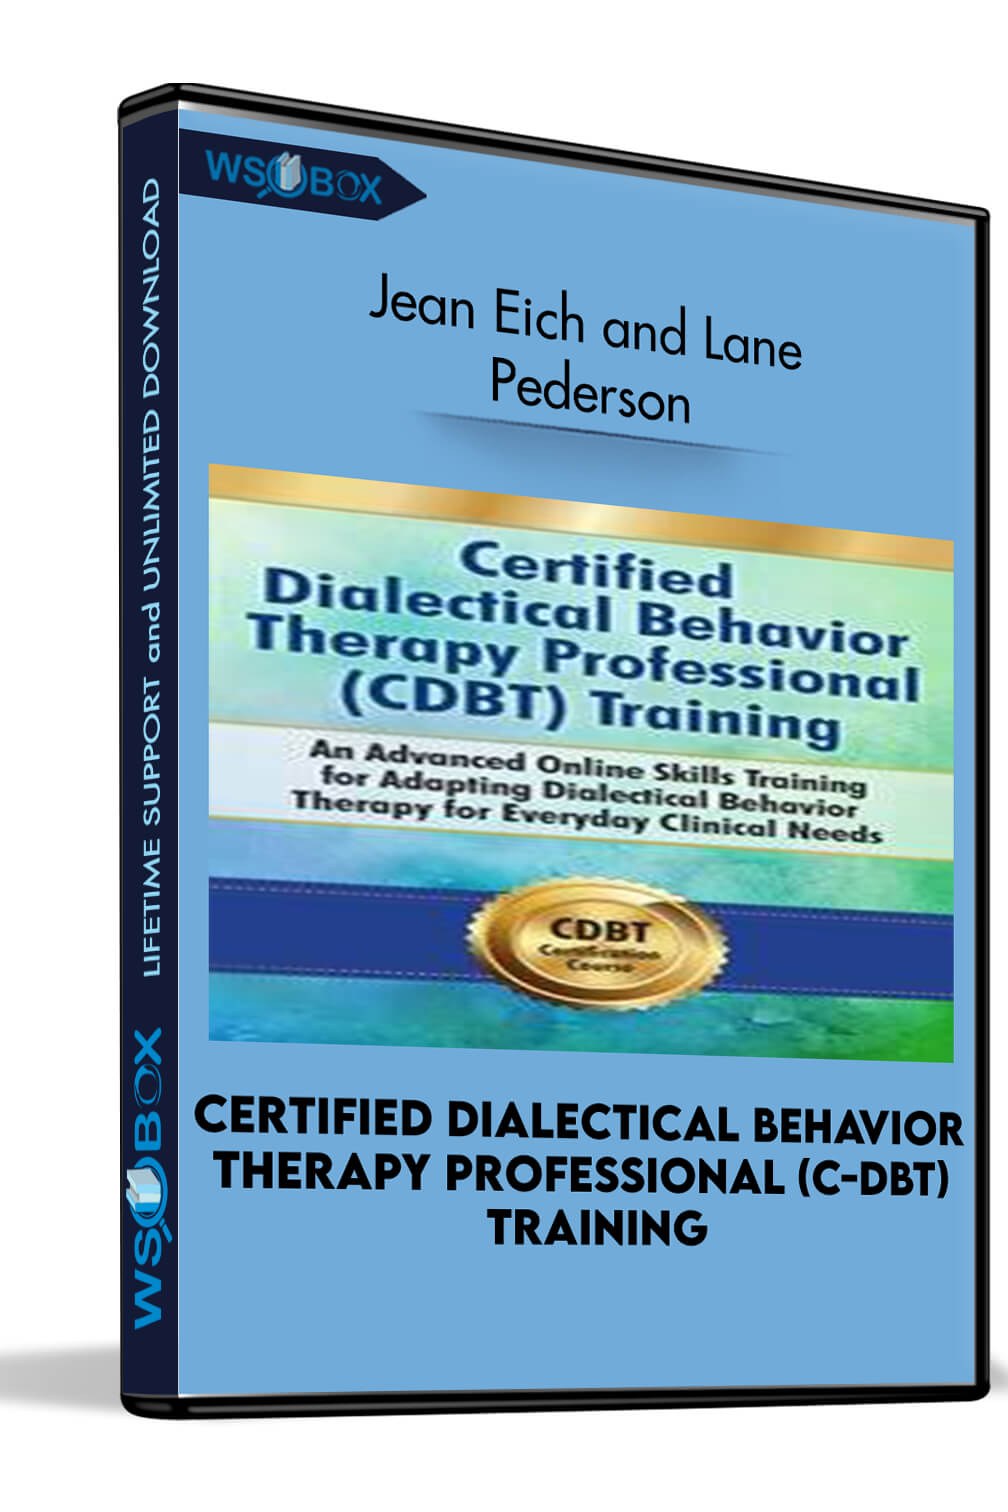 Certified Dialectical Behavior Therapy Professional (C-DBT) Training: An Advanced Online Skills Training for Adapting Dialectical Behavior Therapy for Everyday Clinical Needs – Jean Eich and Lane Pederson